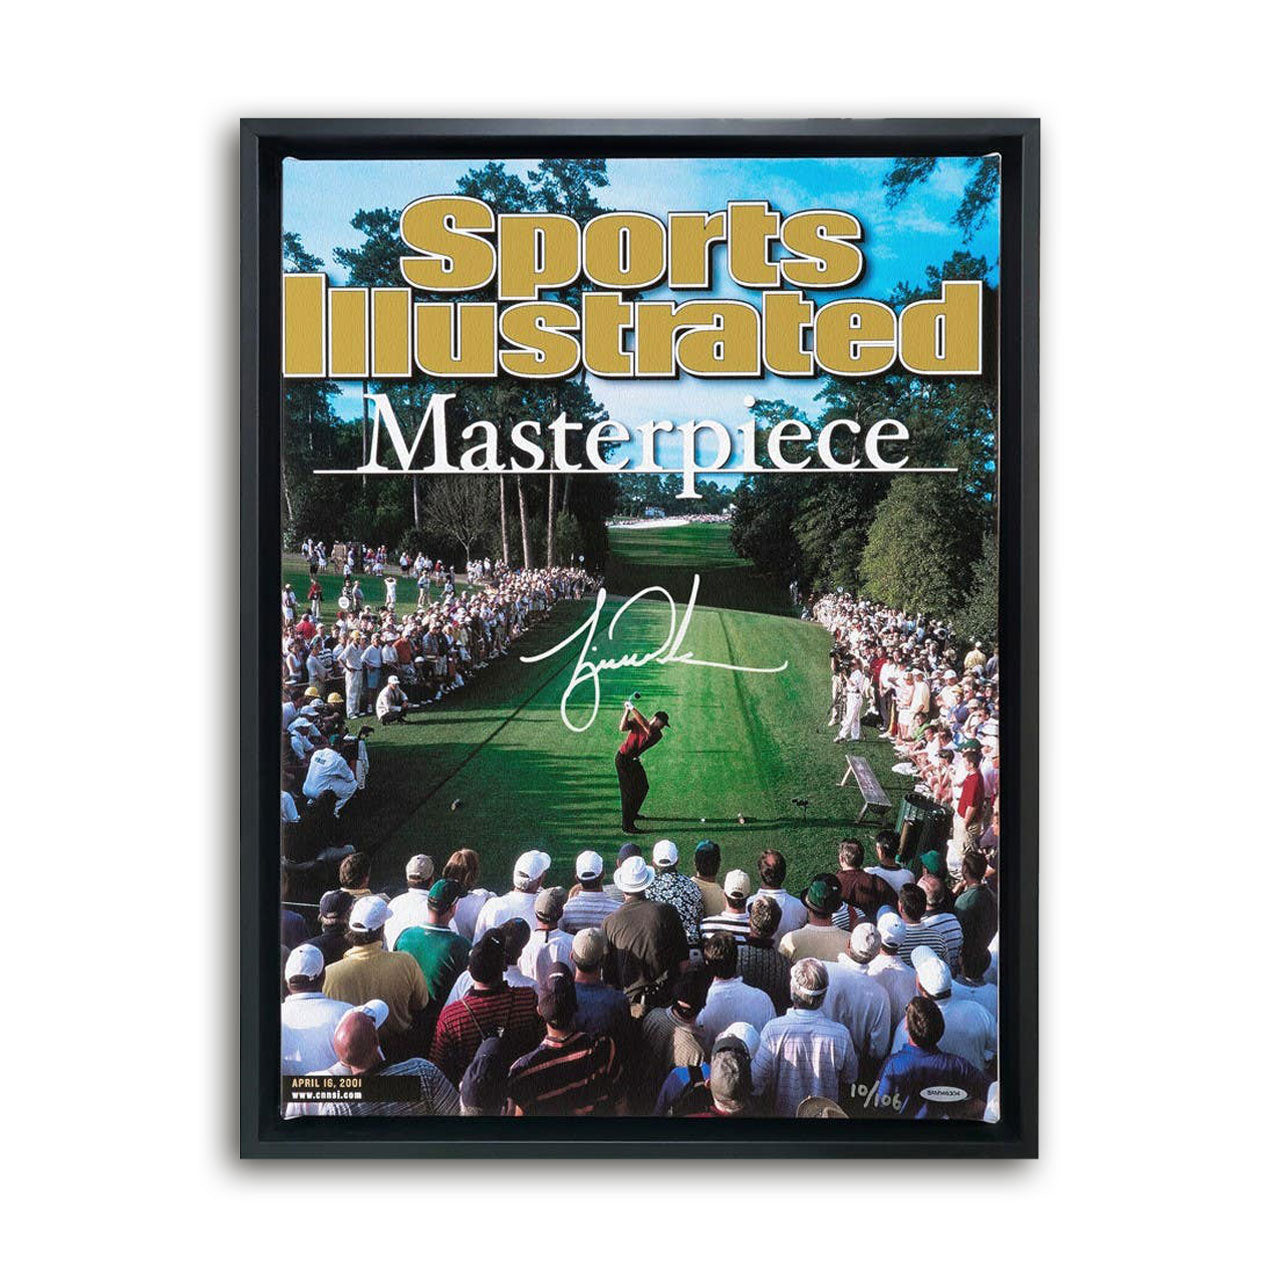 Tiger Woods 2001 Masters Signed SI Cover Framed Print, #Tiger #Woods #Masters #Signed #Cover #Framed #Print